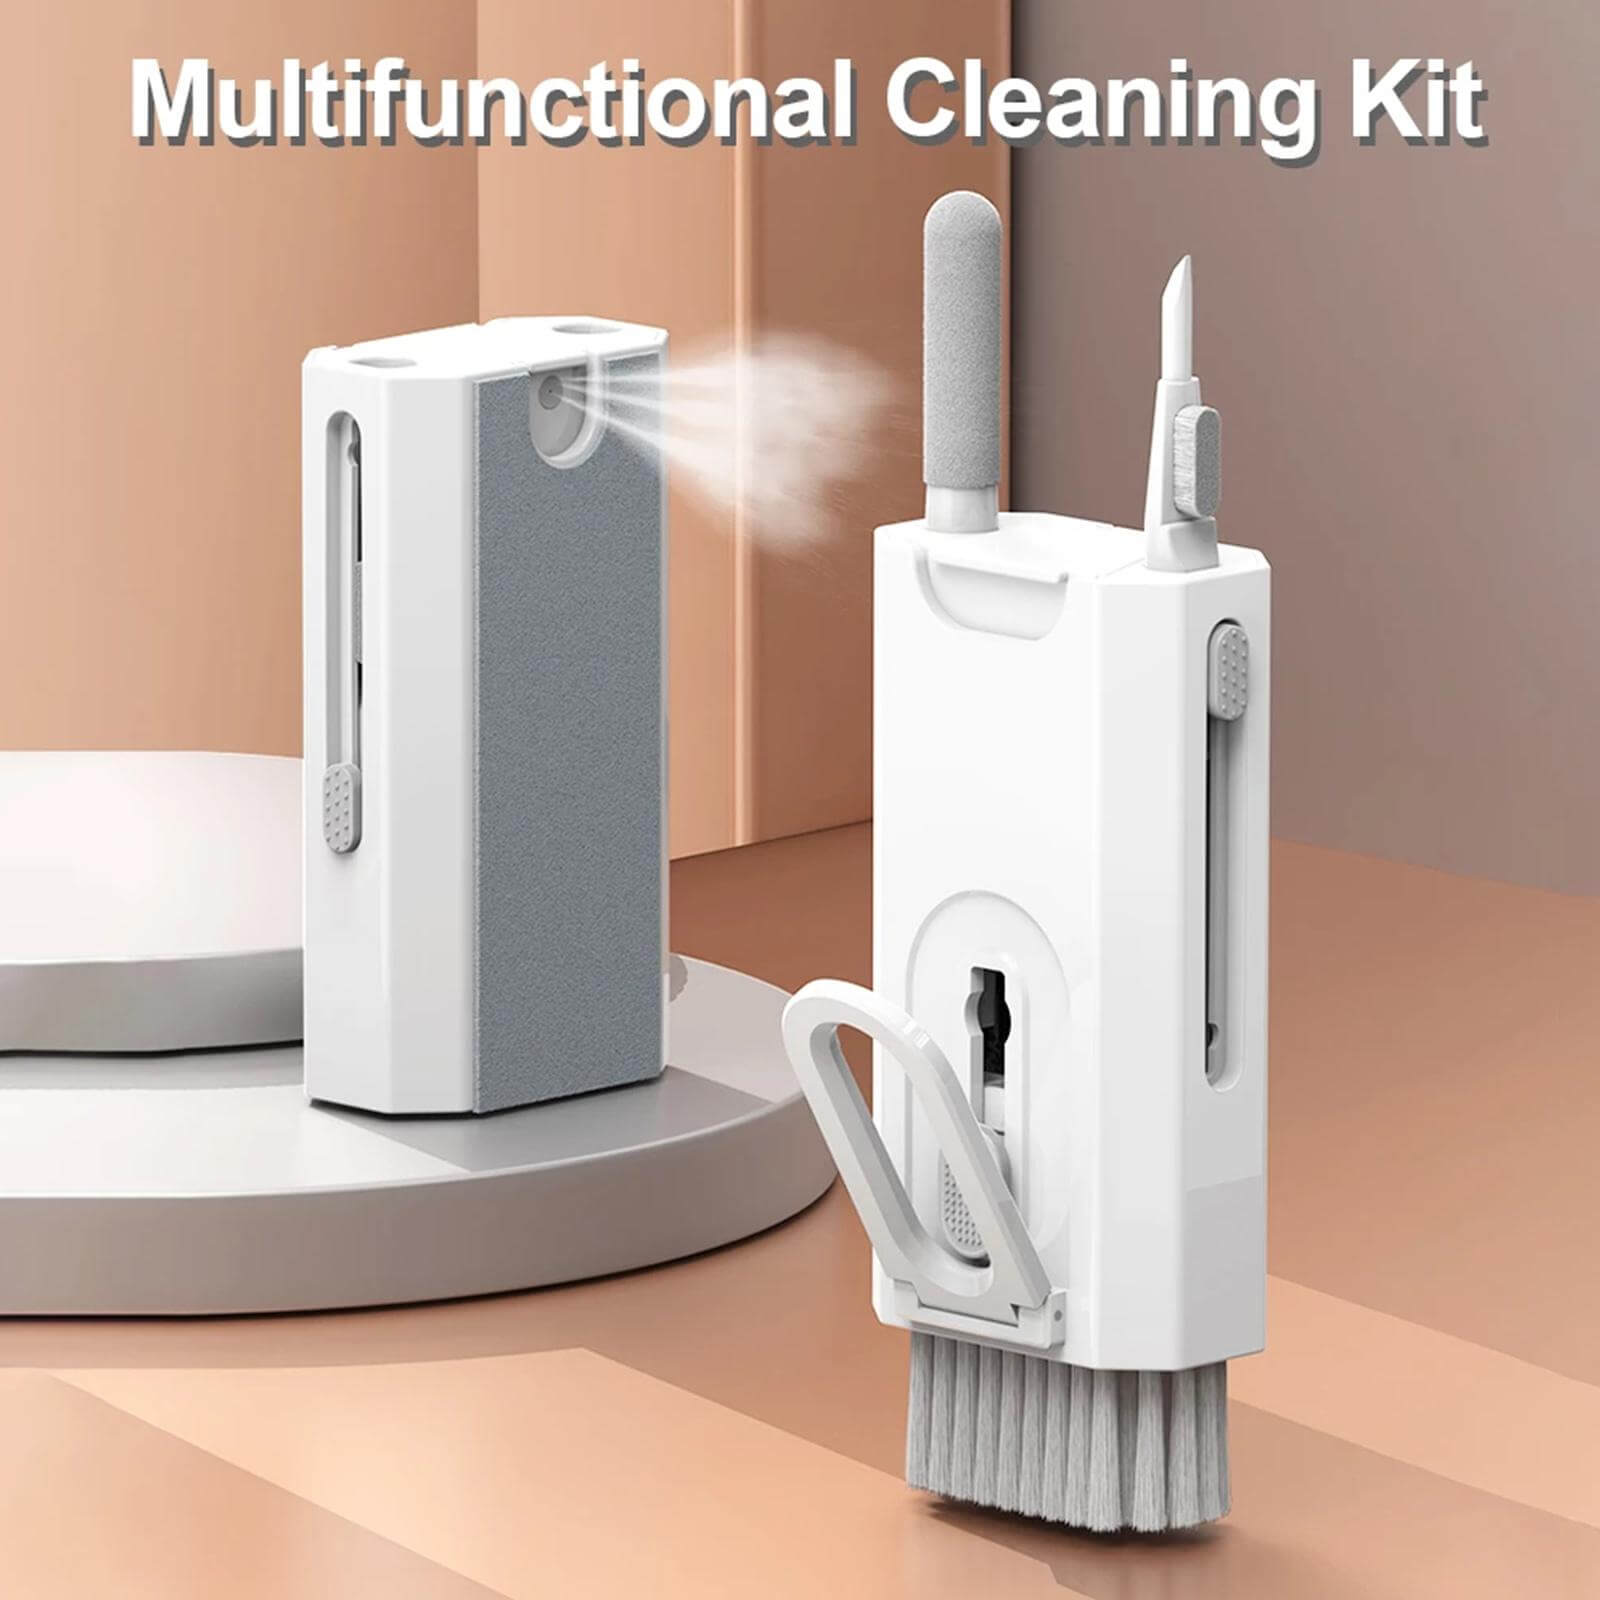 Multi Function 8 in 1 Cleaning Kit